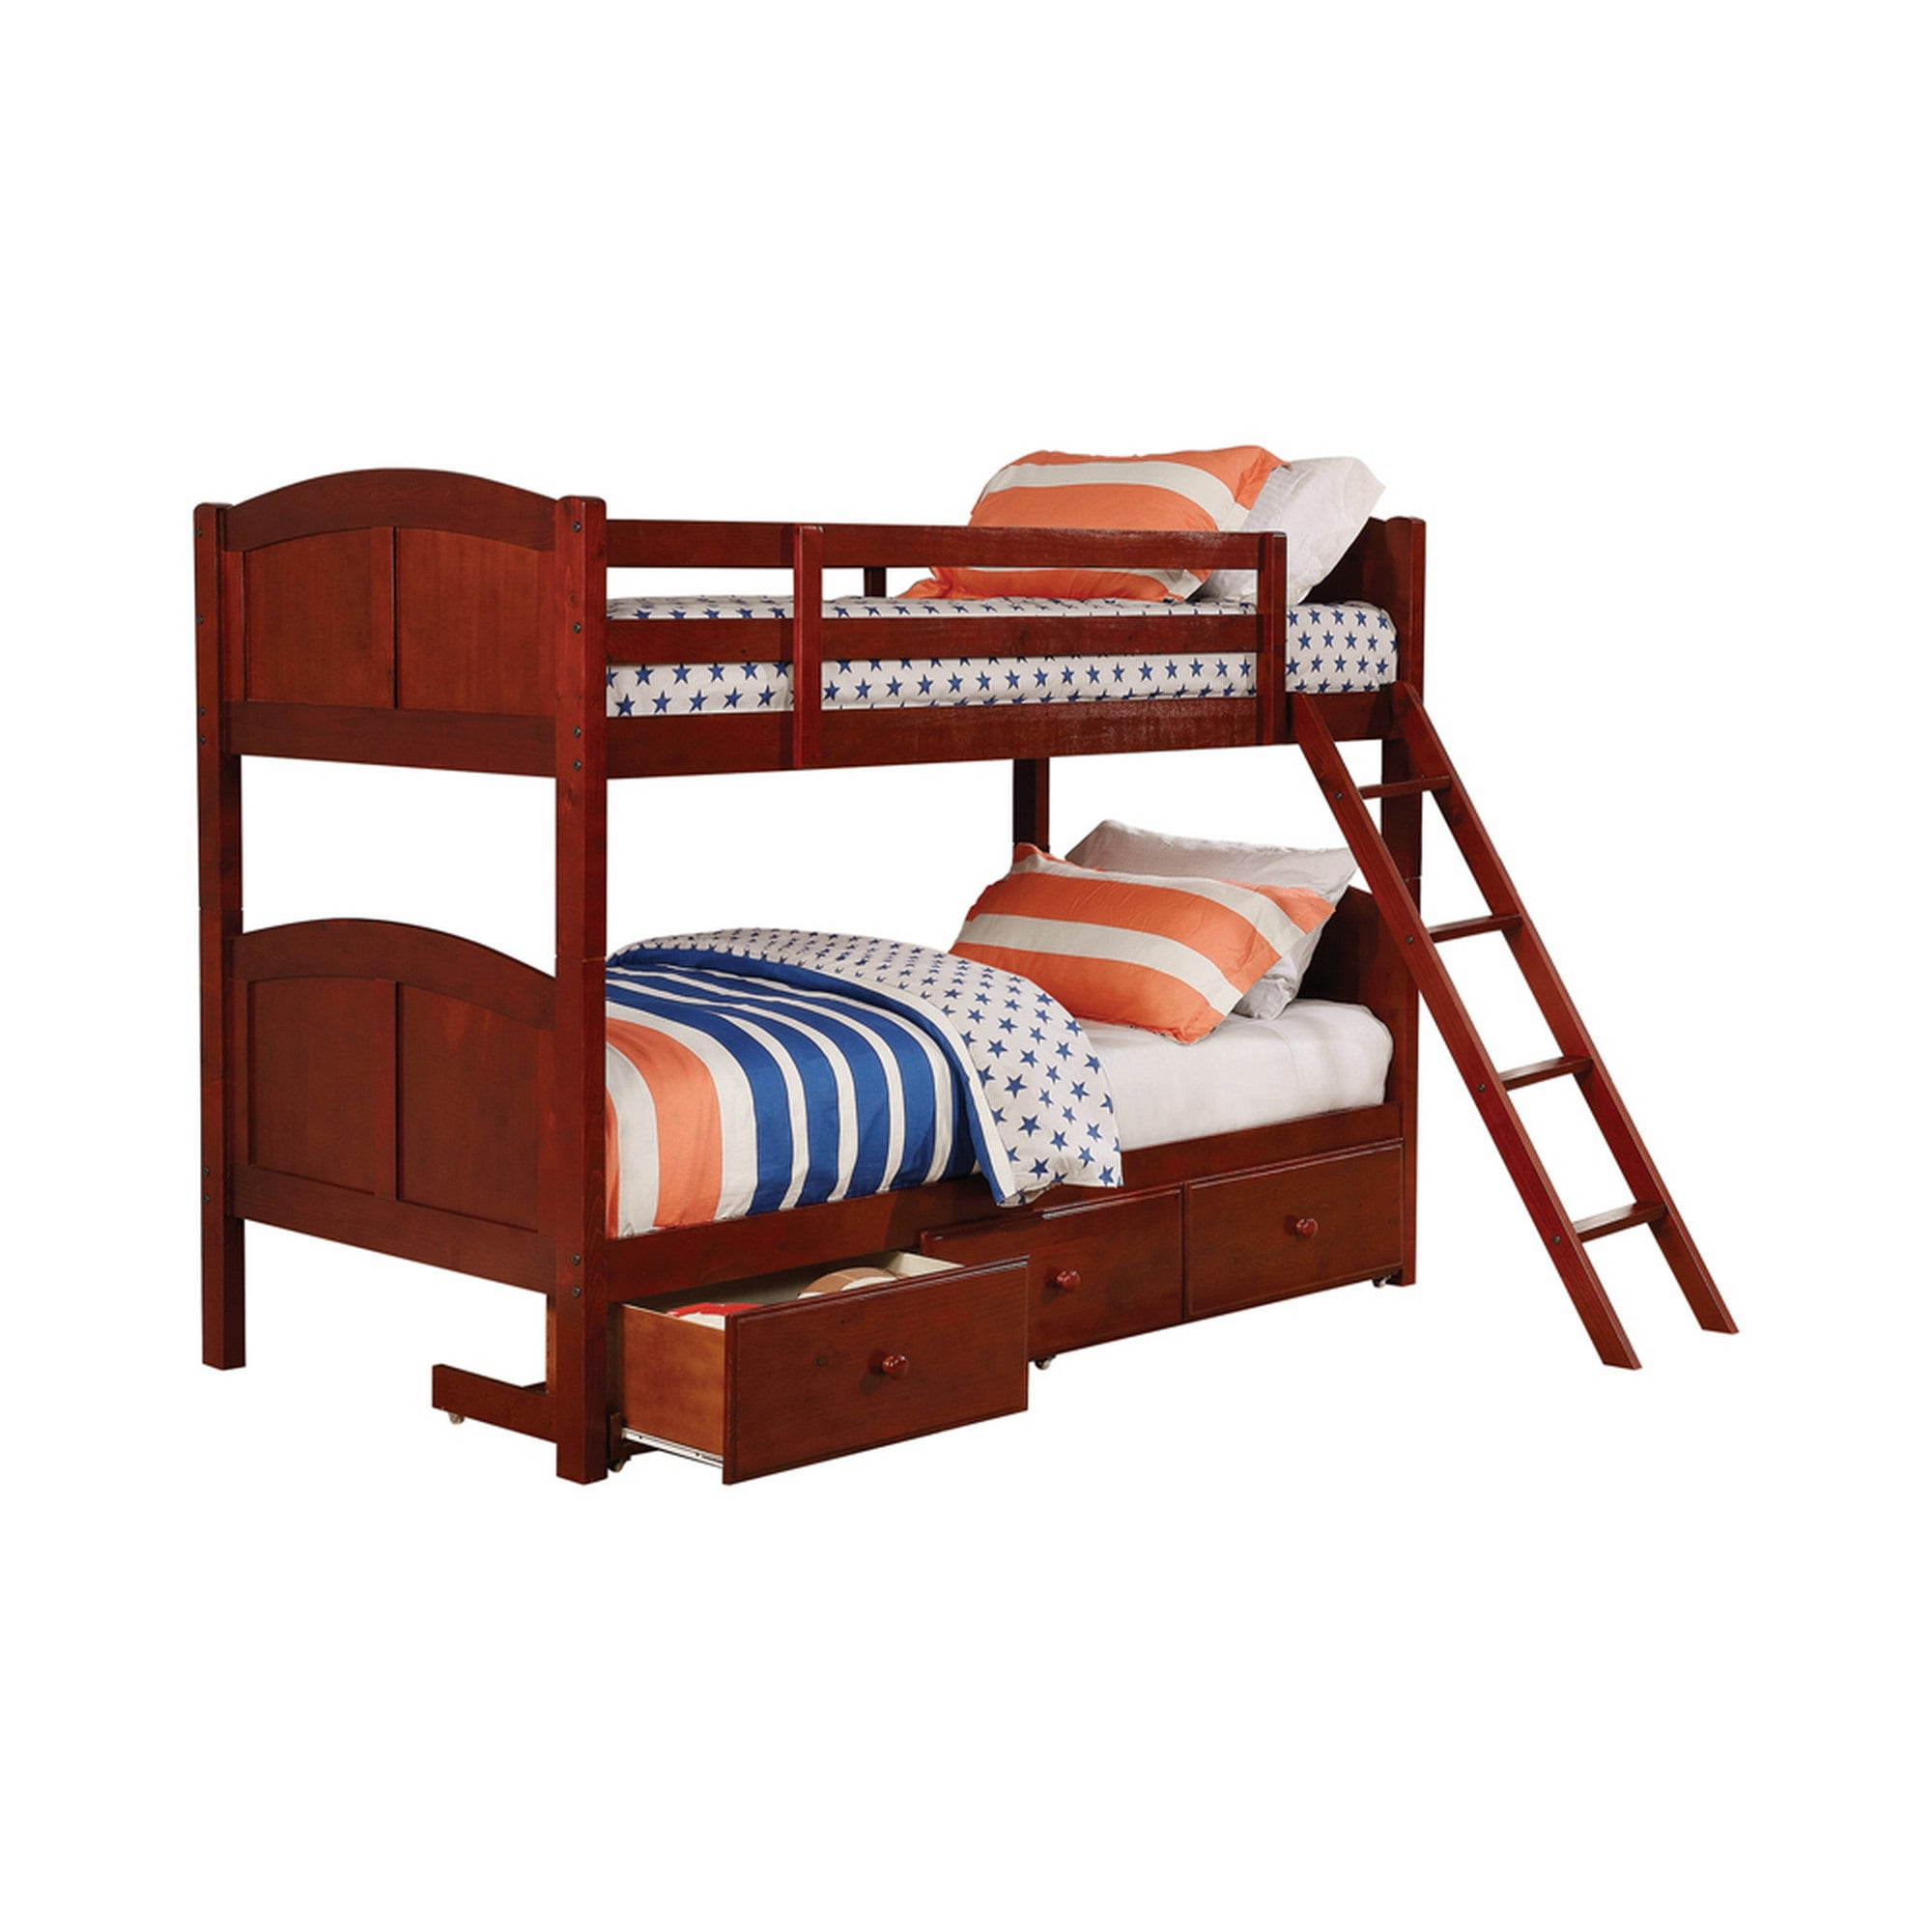 Wooden Twin Over Bunk Bed With, Sears Wooden Bunk Beds